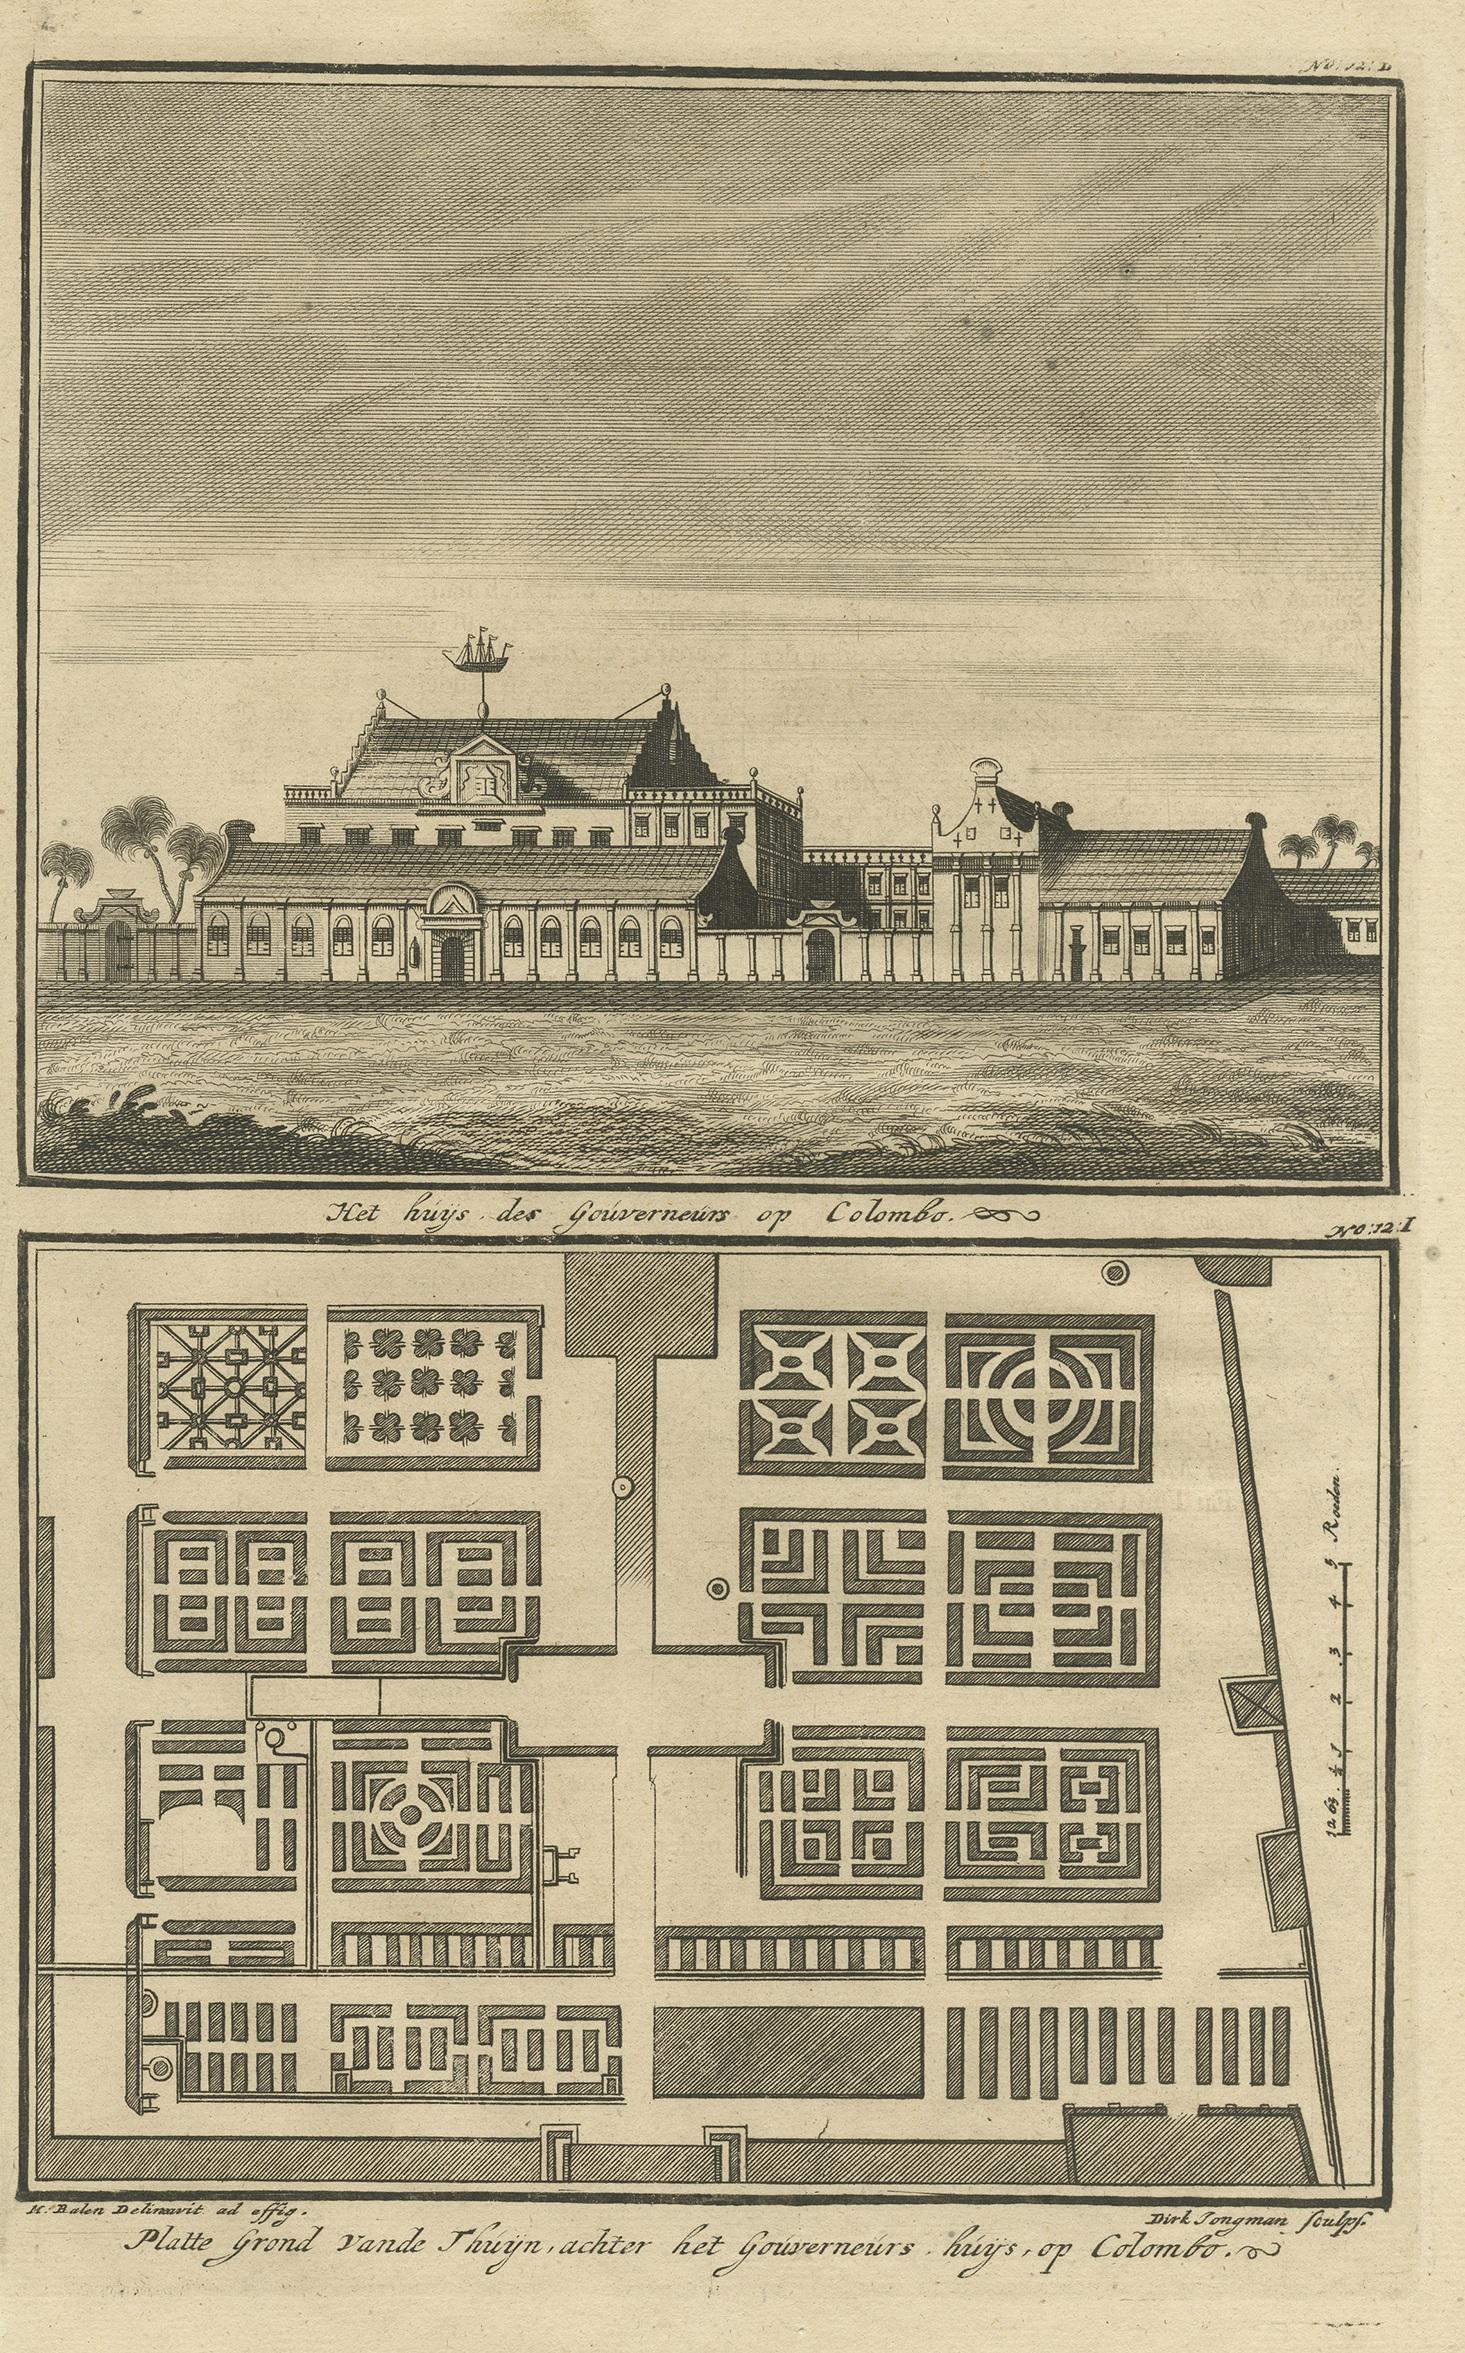 Antique print titled 'Het huijs des Gouverneurs op Colombo / Platte Grond vande Thuijn, achter het Gouverneurs huijs, op Colombo'. View of the house of the governor of Colombo and a plan of his garden, Sri Lanka. This print originates from 'Oud en